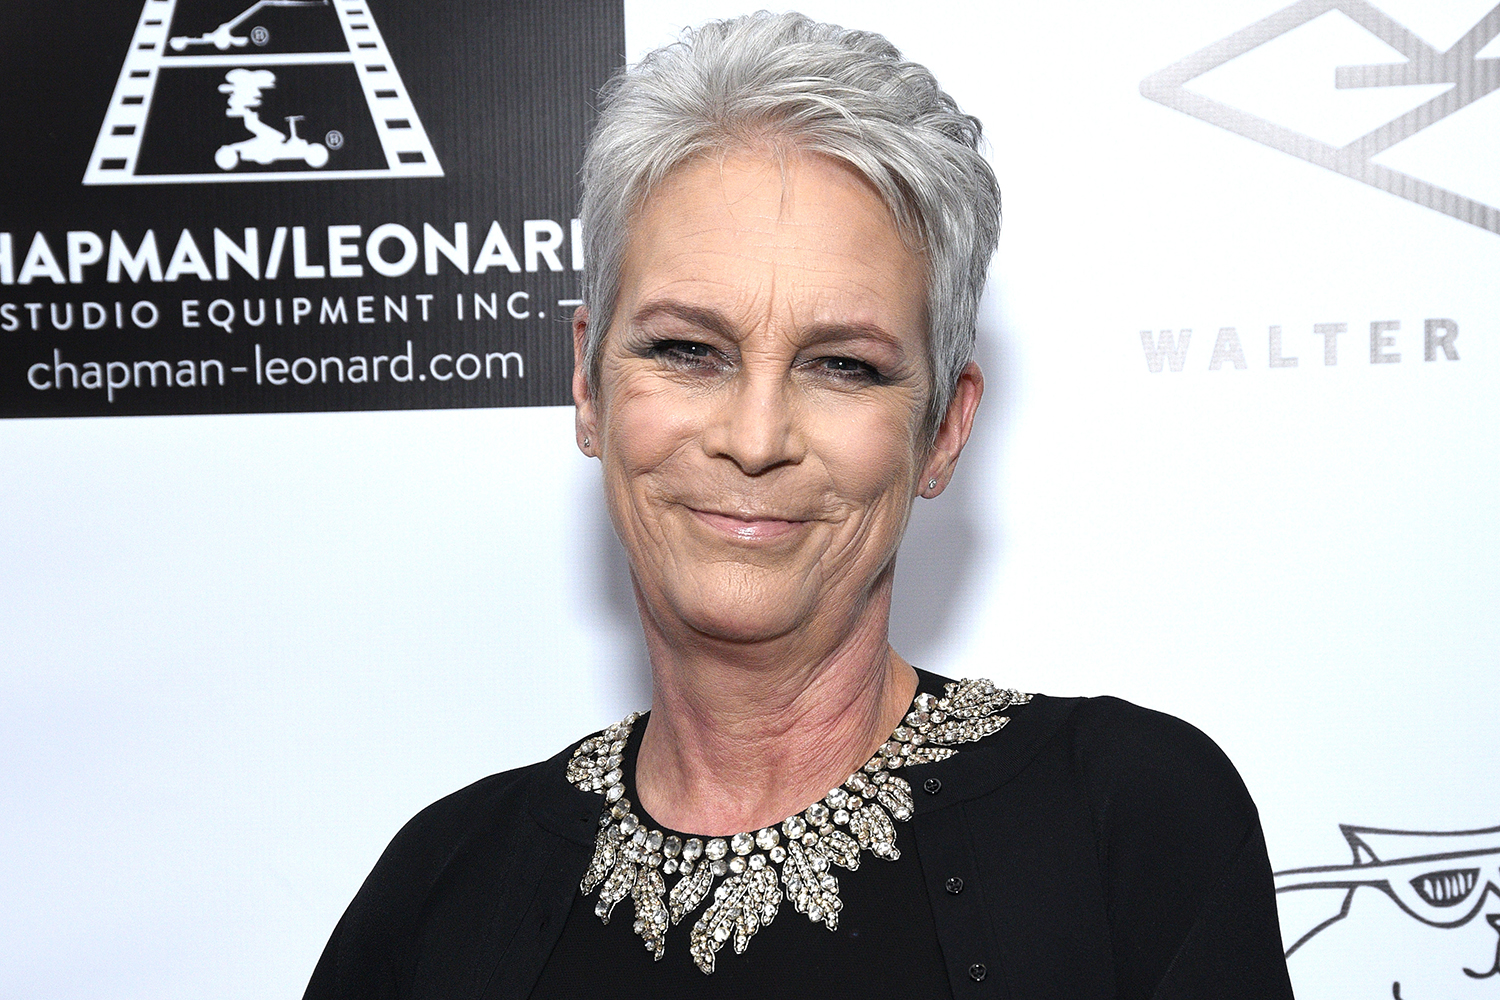 Jamie Lee Curtis Fears Plastic Surgery and Procedures 'Are Wiping Out Generations of Beauty'